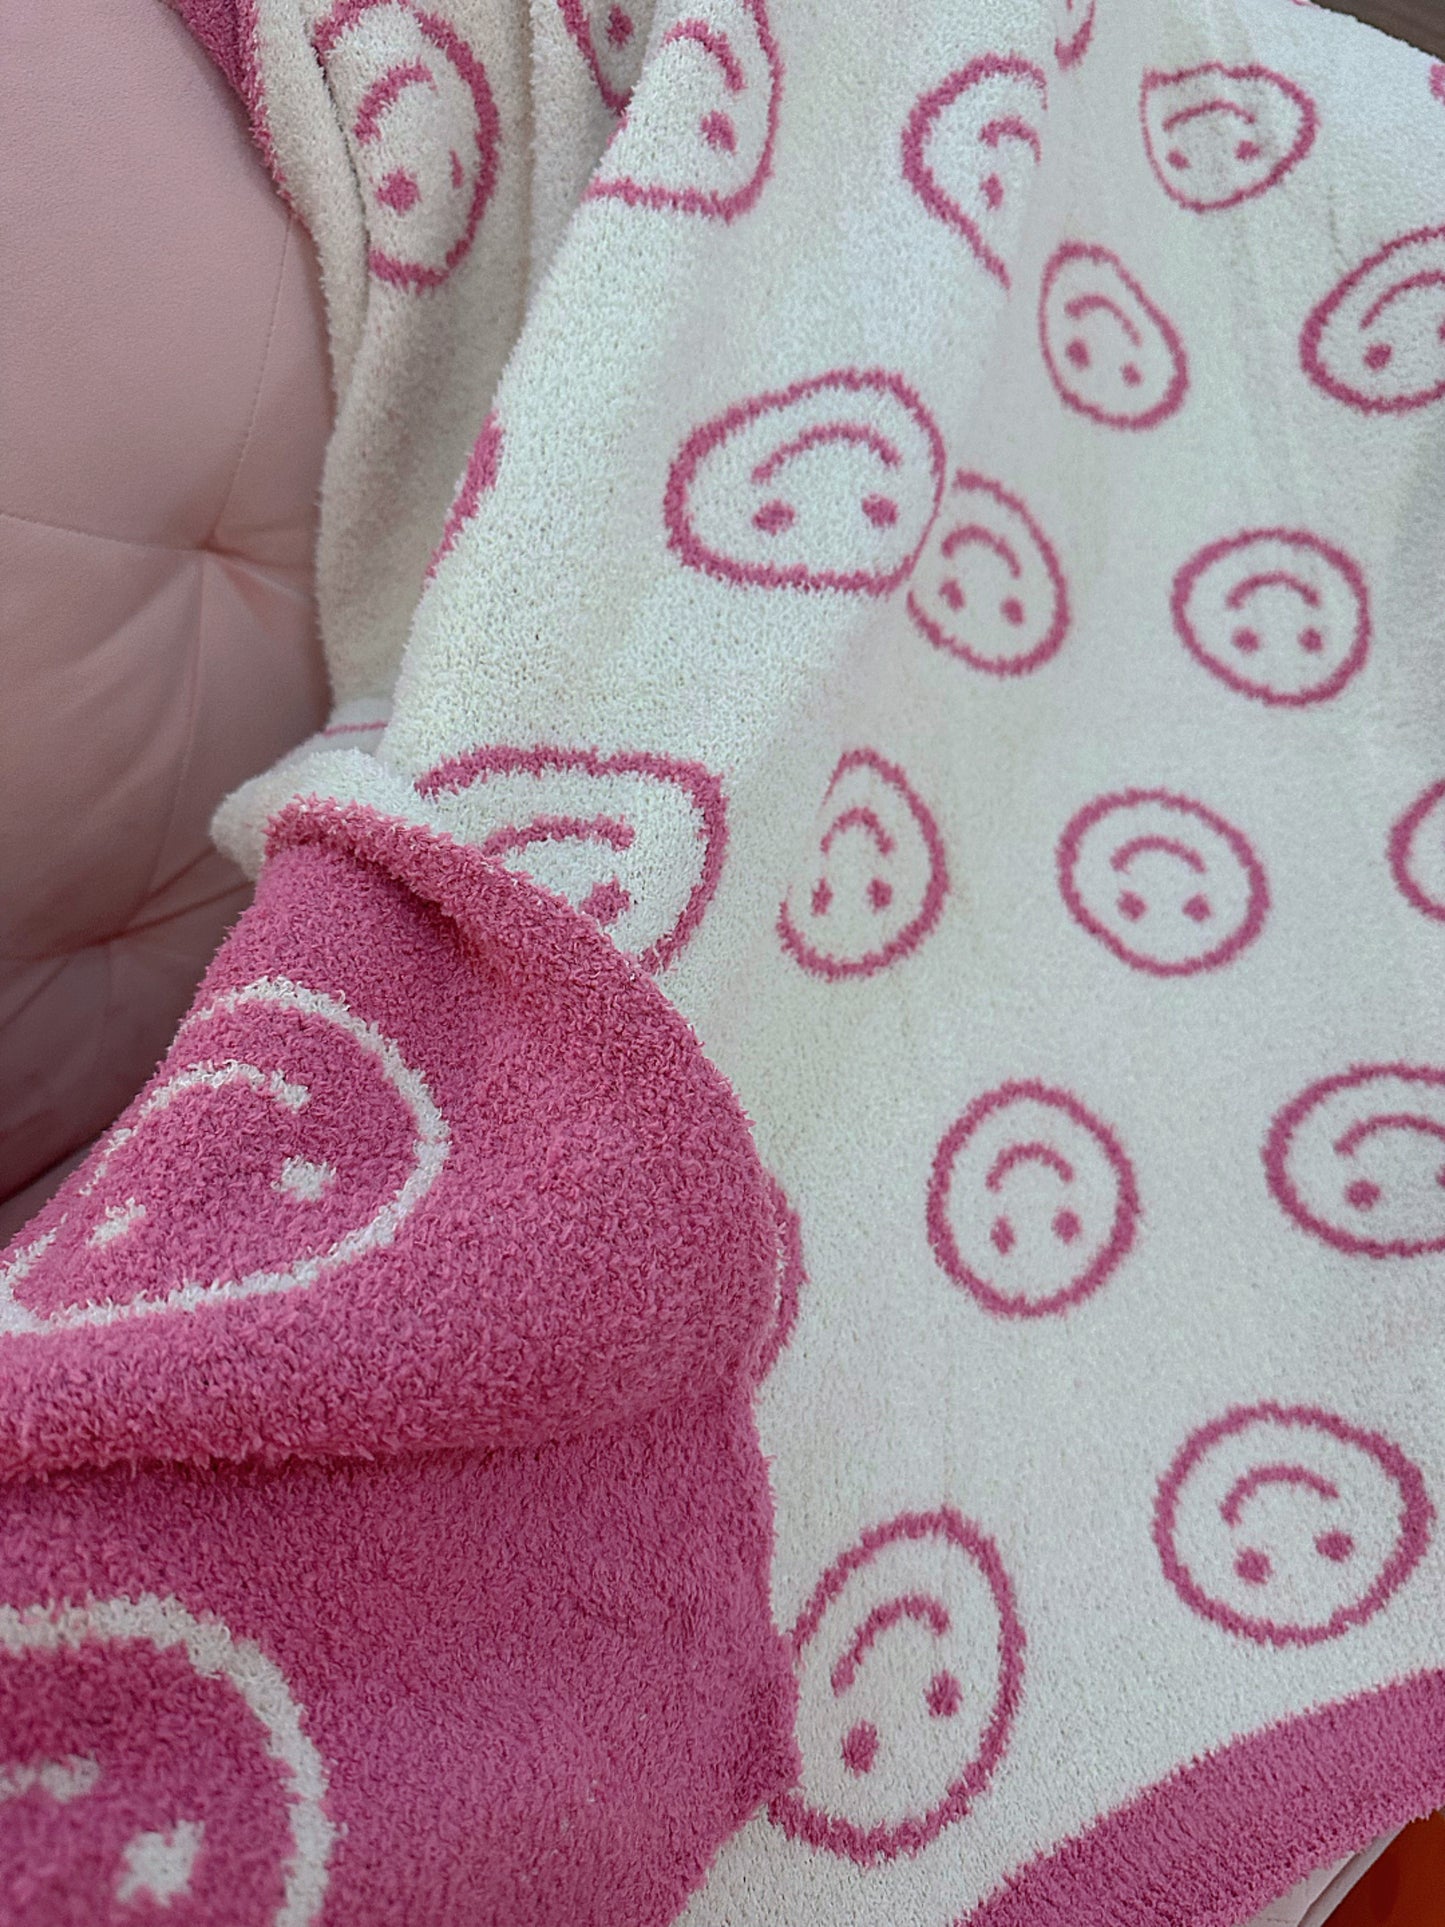 Oh My Comfy Blanket- All Smiley Faces